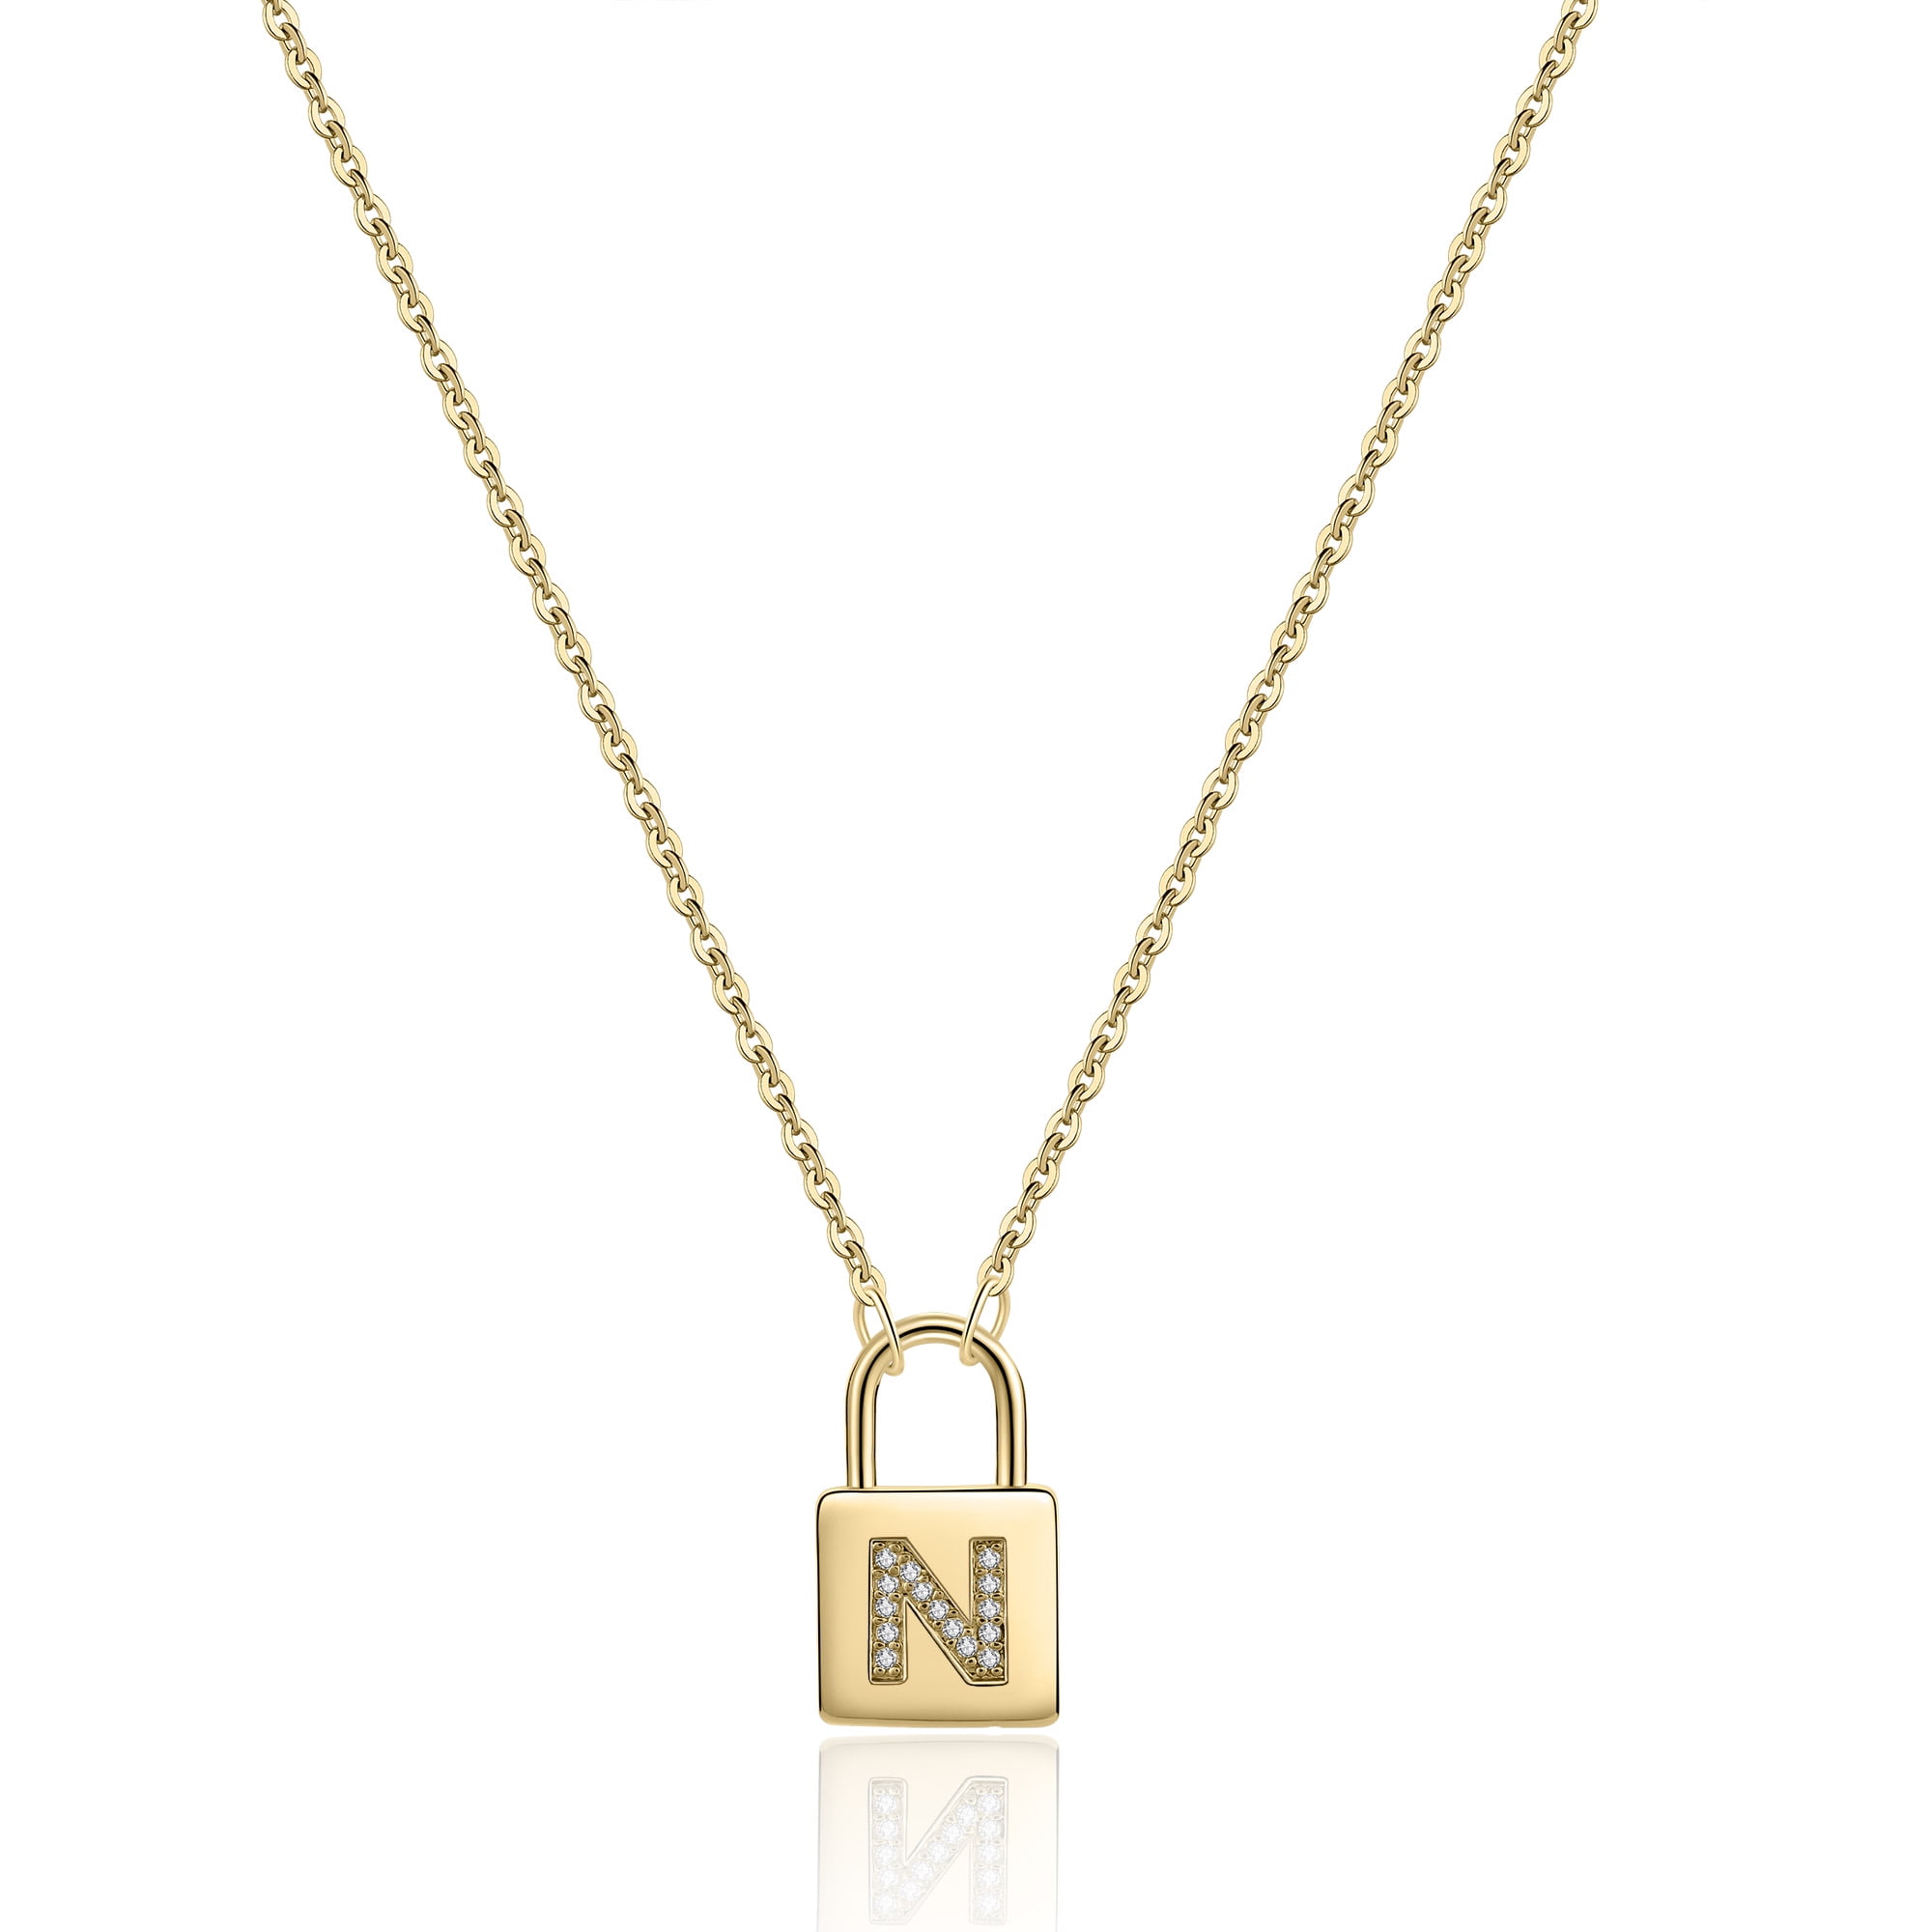 Padlock Necklace - Initial Necklace (18k gold) by Talisa